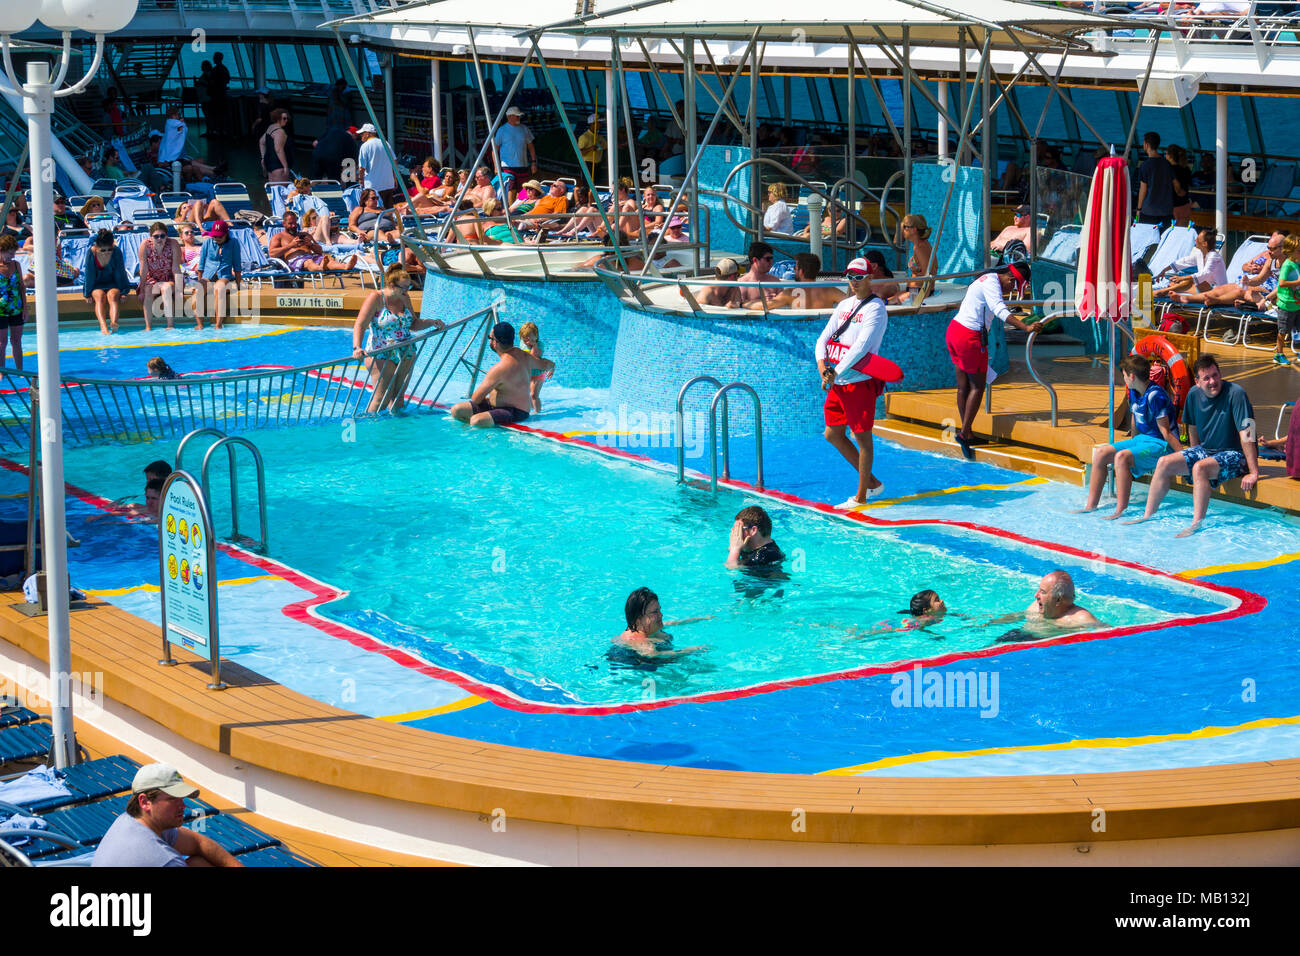 Poolside Activities aboard the cruise ship Royal Caribbean Rhapsody of the  Seas at sea in the Gulf of Mexico Stock Photo - Alamy